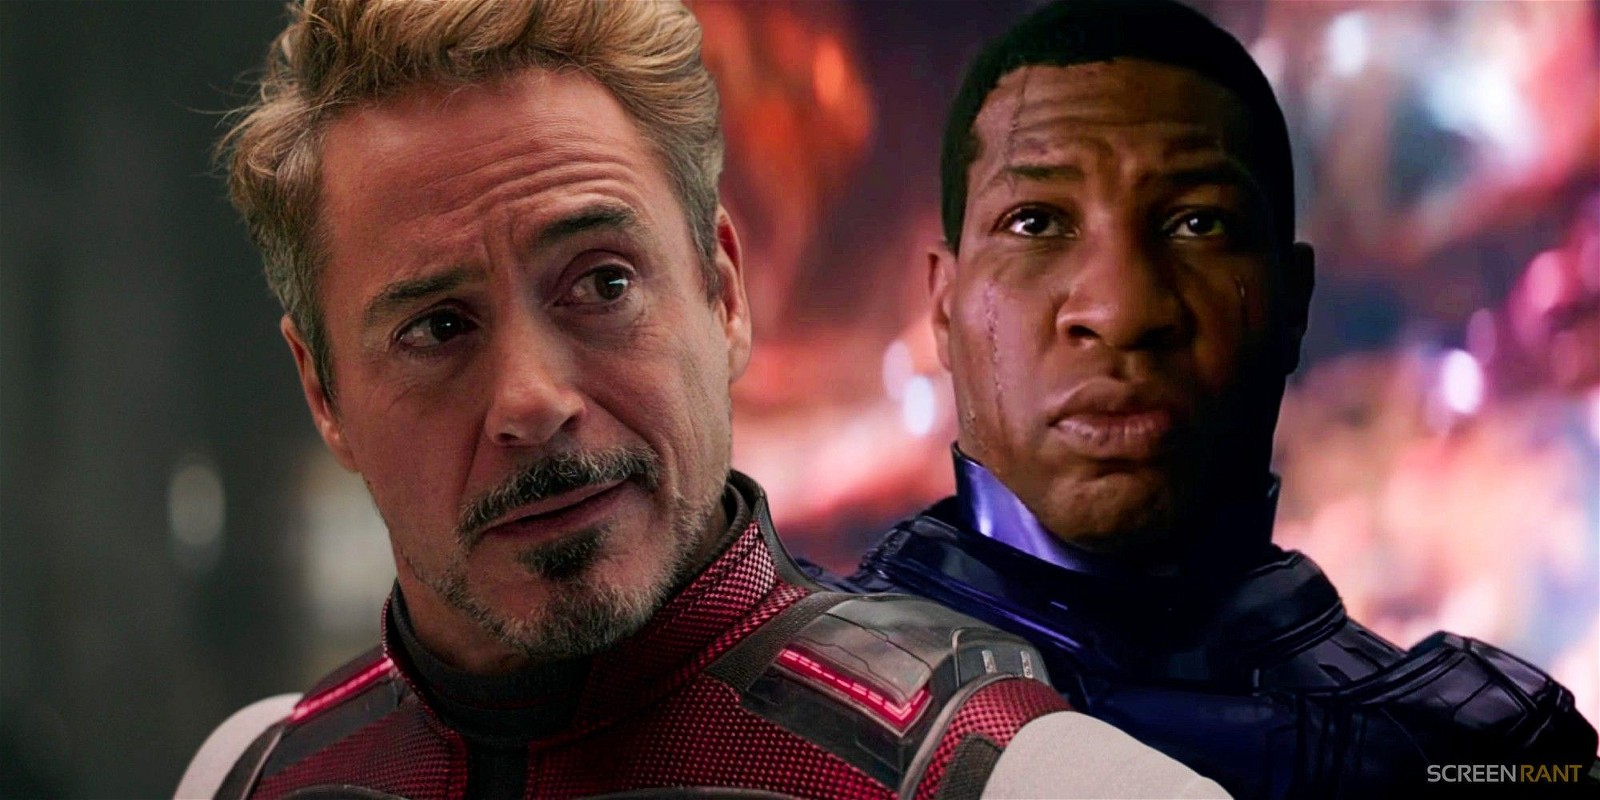 Robert Downey Jr. will not return to face Jonathan Majors in the MCU